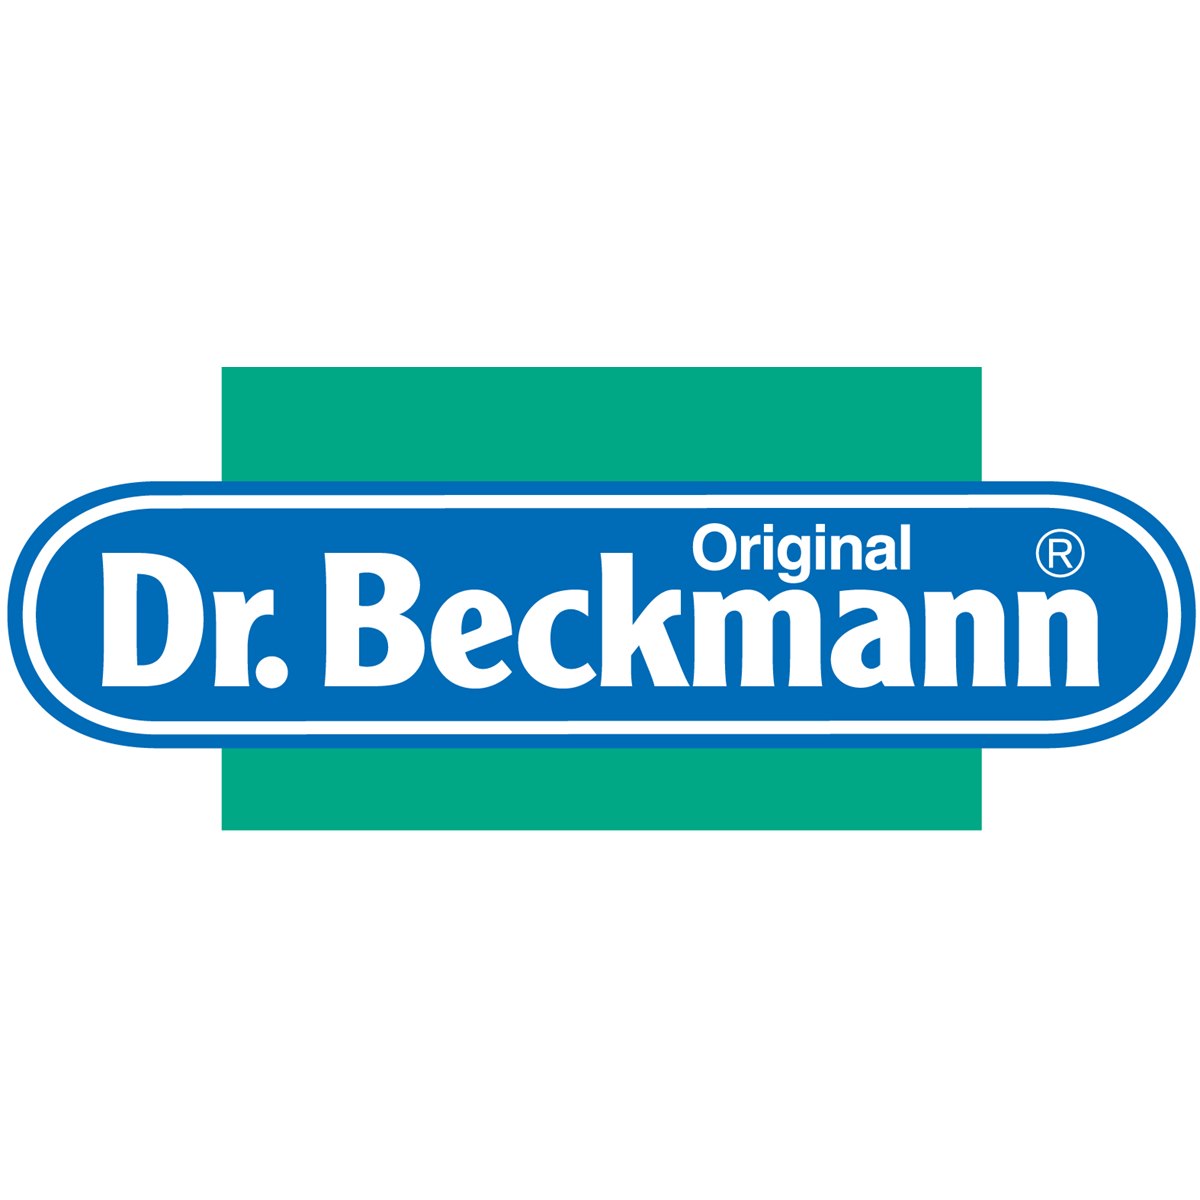 Where to Buy Dr Beckmann Products